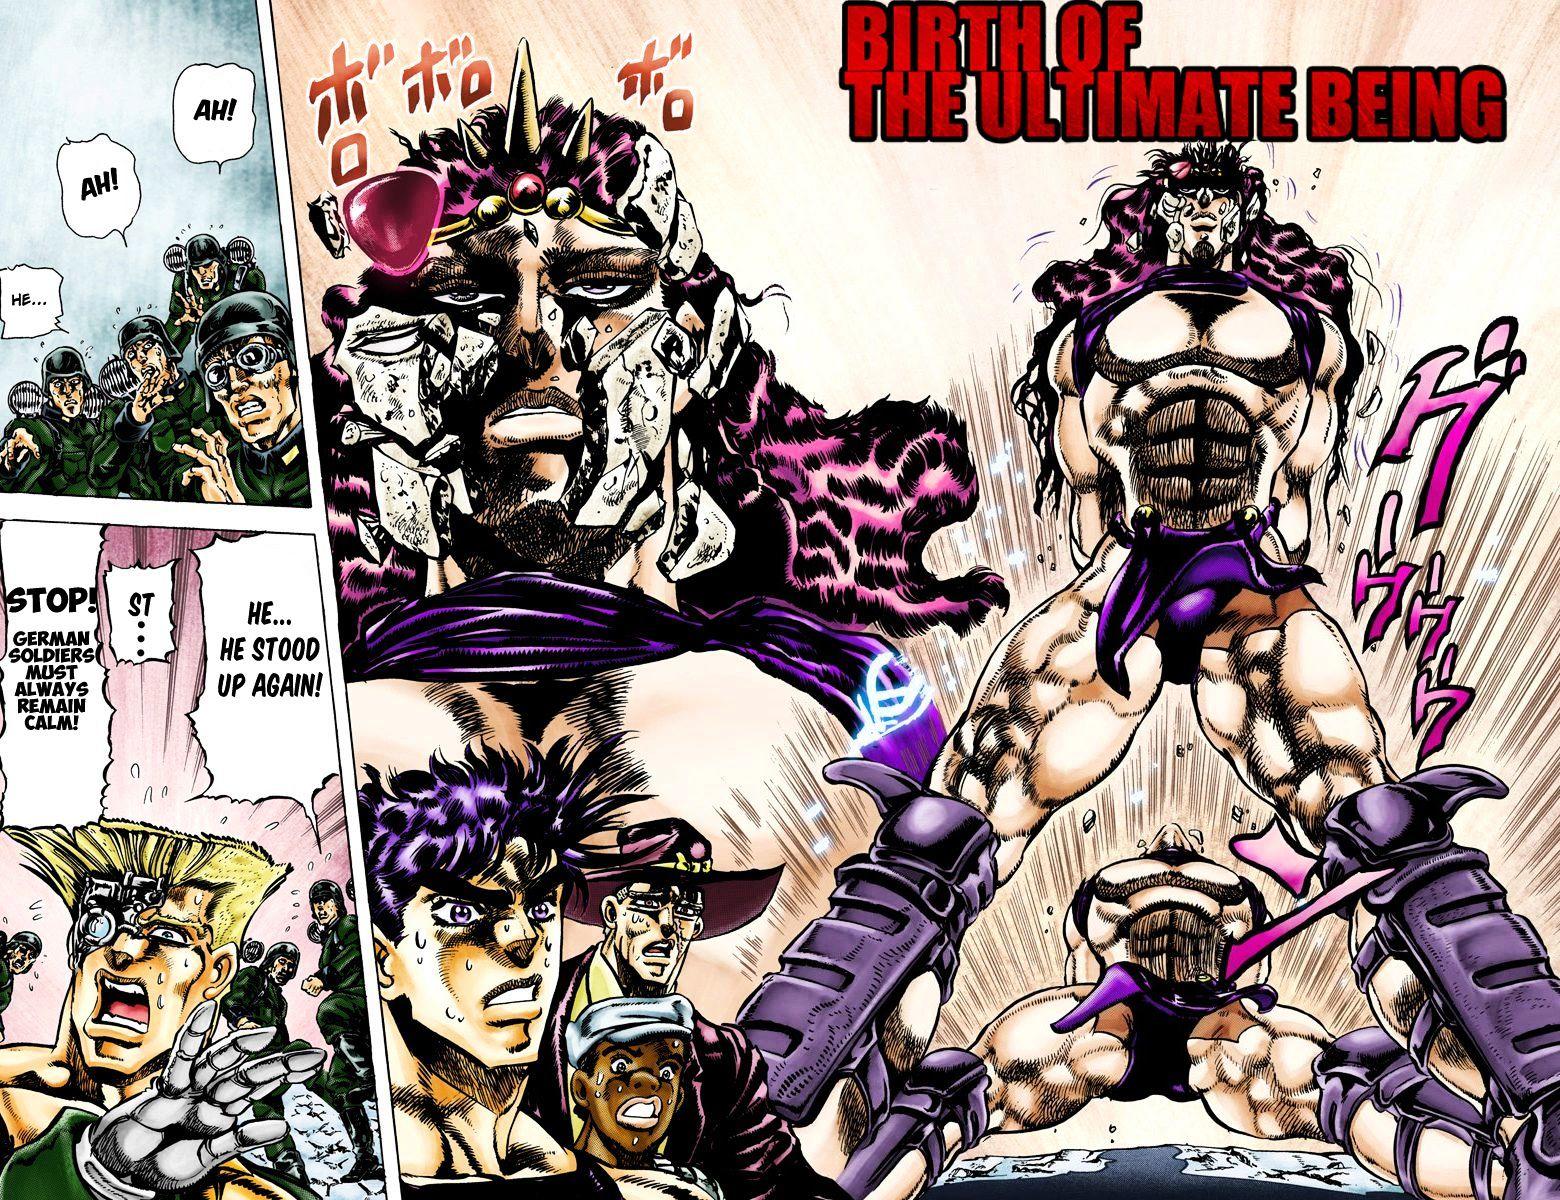 Jojo's Bizarre Adventure Vol.12 Chapter 109 : Birth Of The Ultimate Being (Official Color Scans) page 2 - 